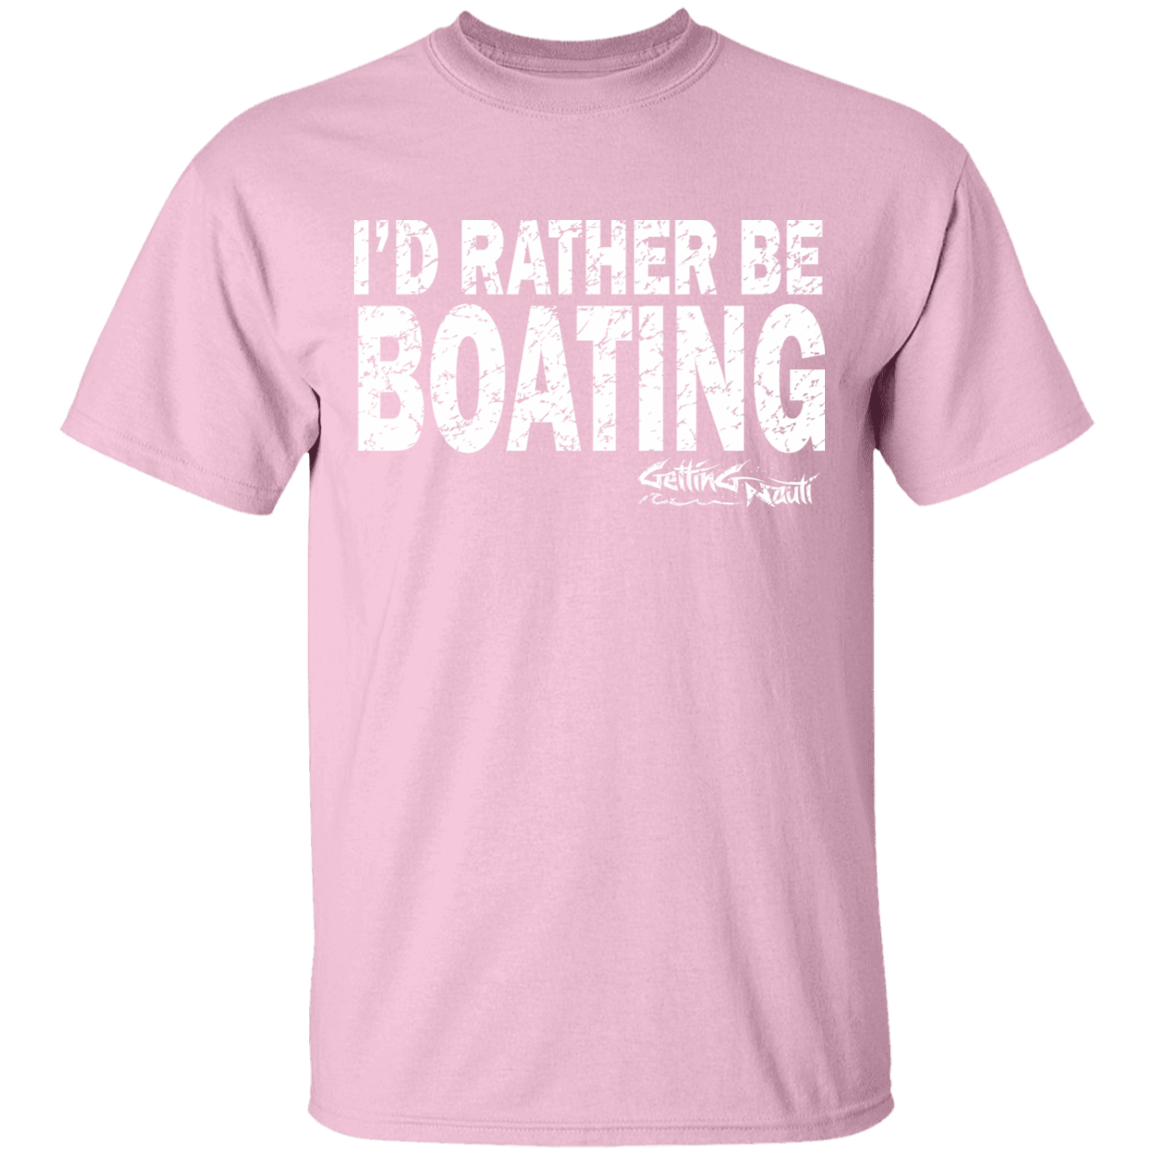 I'd Rather Be Boating - Cotton T-Shirt